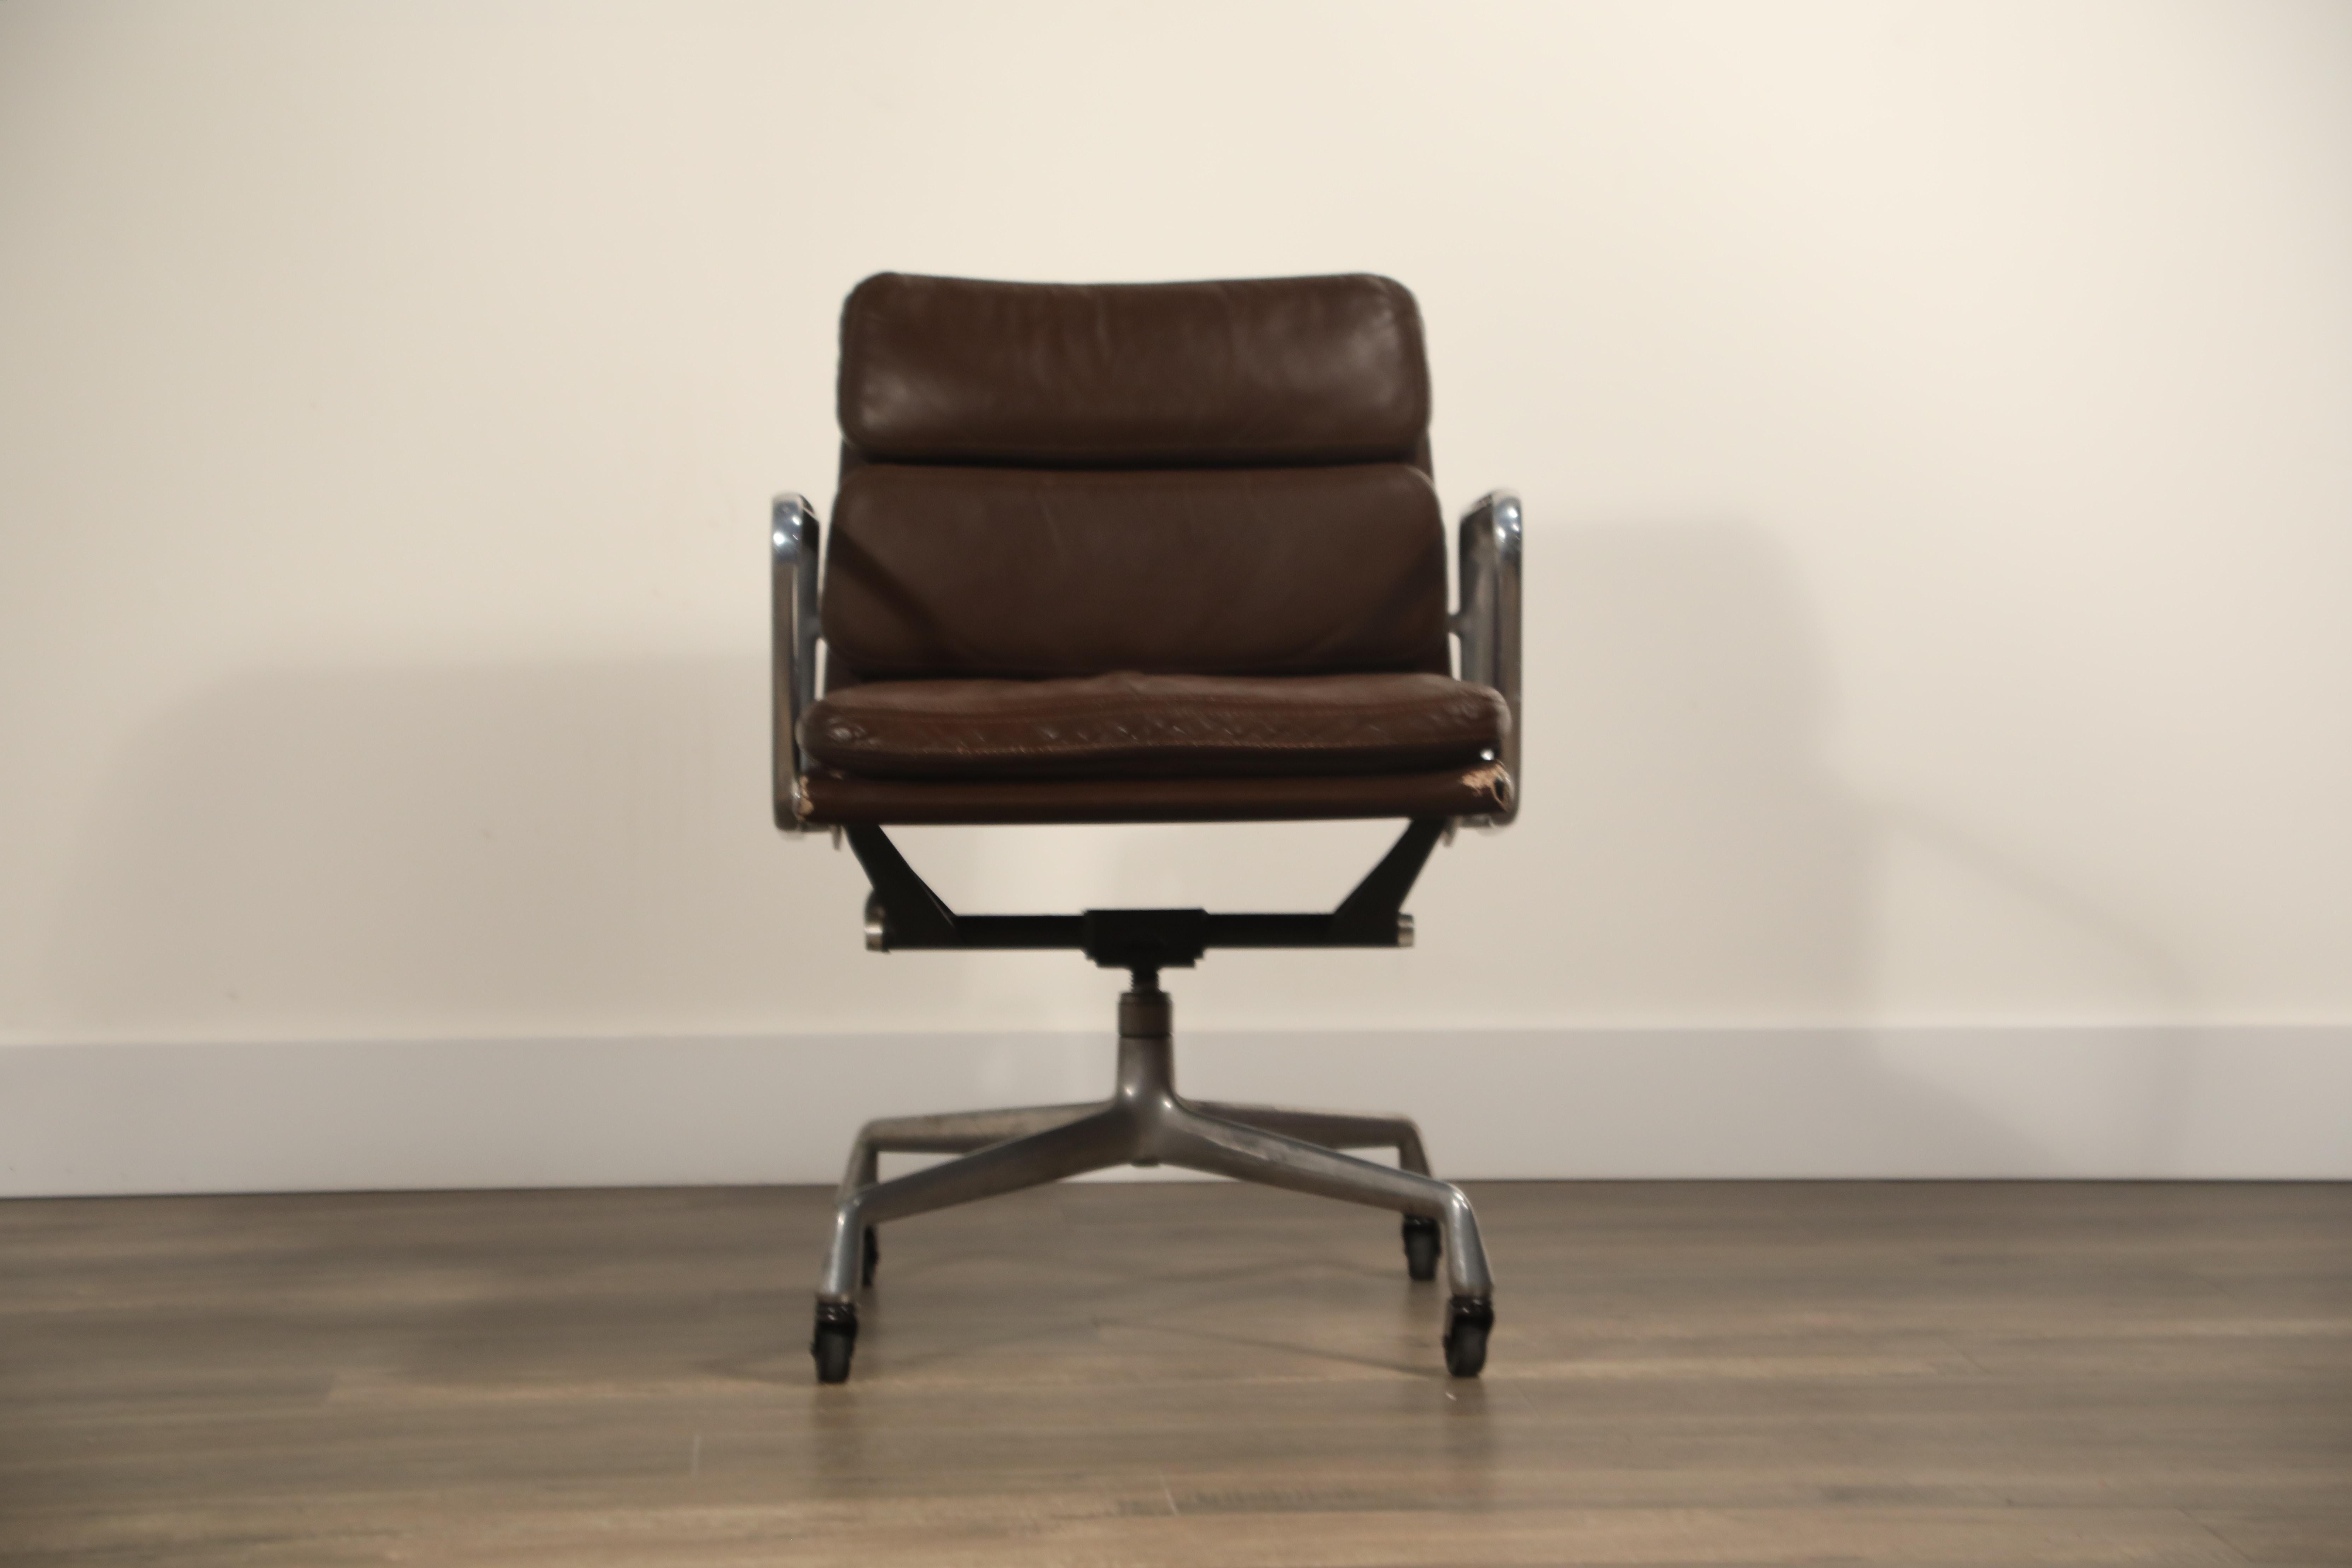 A collectible and sought after soft pad Management desk chair from the Aluminium Group line, designed by Charles and Ray Eames for Herman Miller. Featuring its original vintage dark brown leather upholstery over four-star aluminium base and frame on